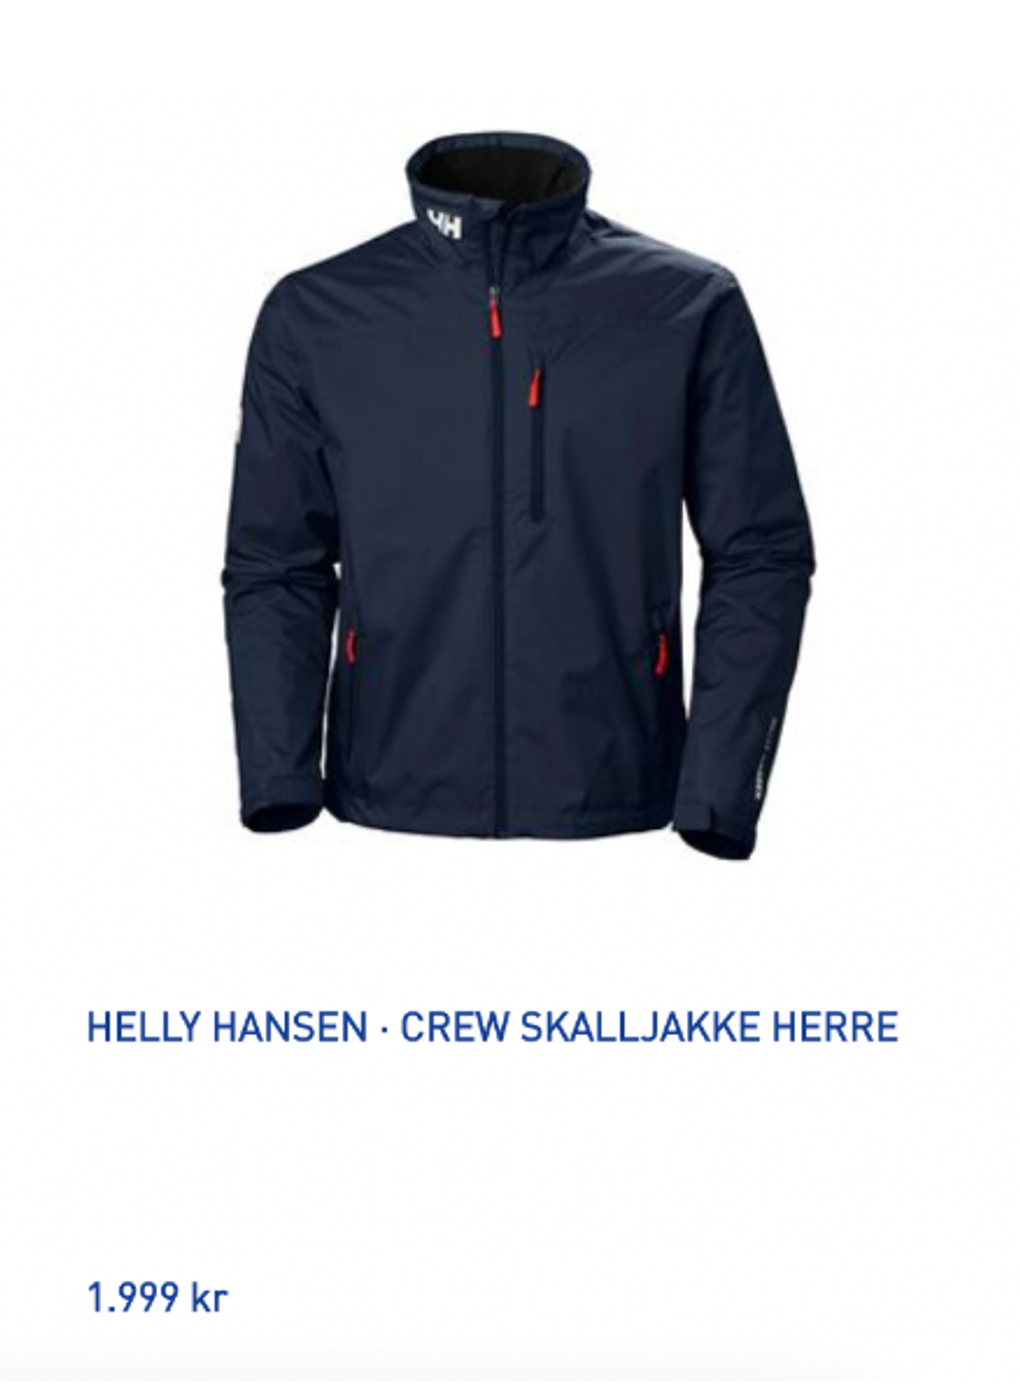 Example from intersport.no: 